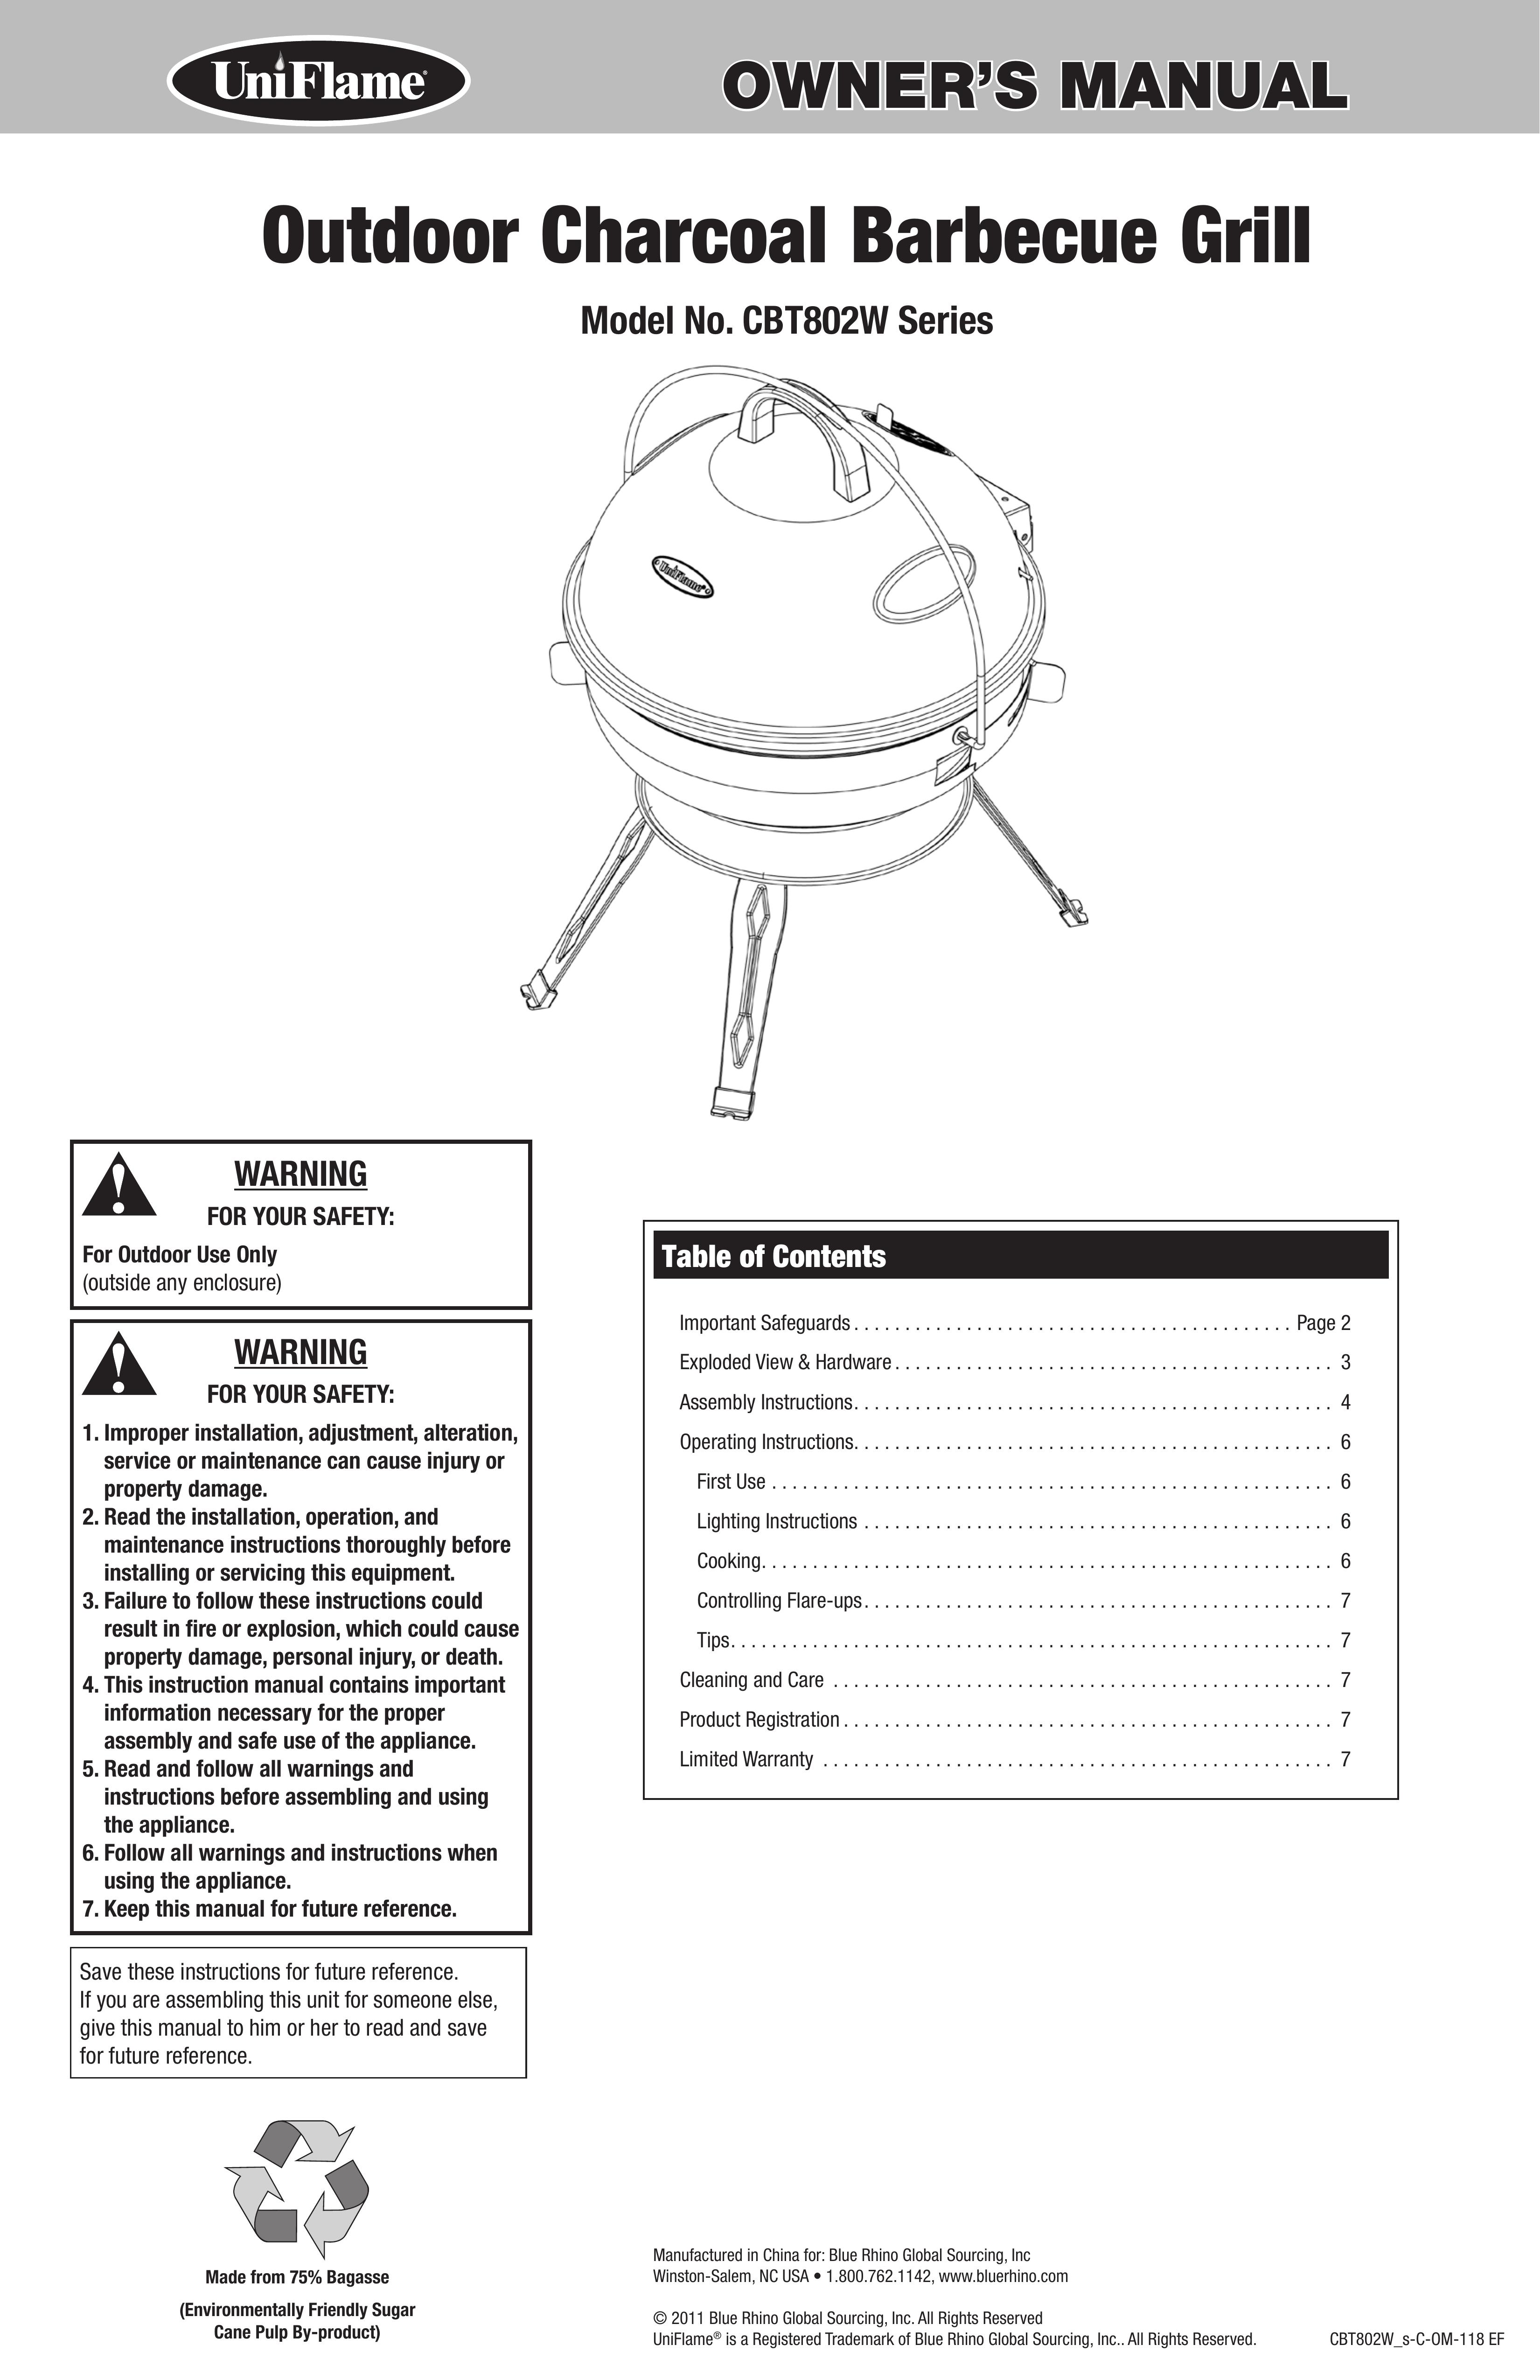 Uniflame CBT802W Charcoal Grill User Manual